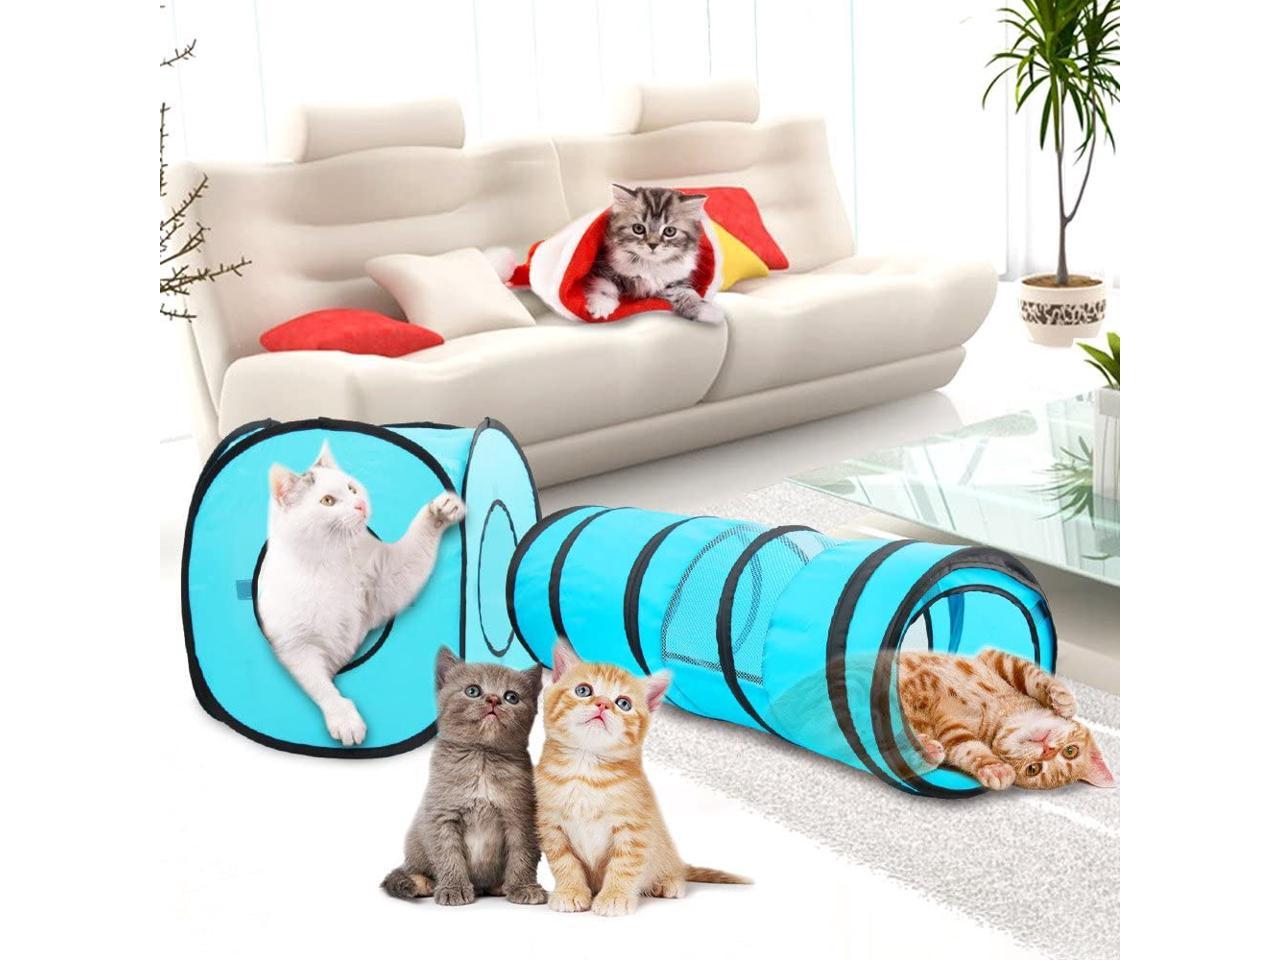 PAWISE Cat Play Tunnel Pop Open Collapsible Cube Tunnel Play Set for Cats and Rabbits 